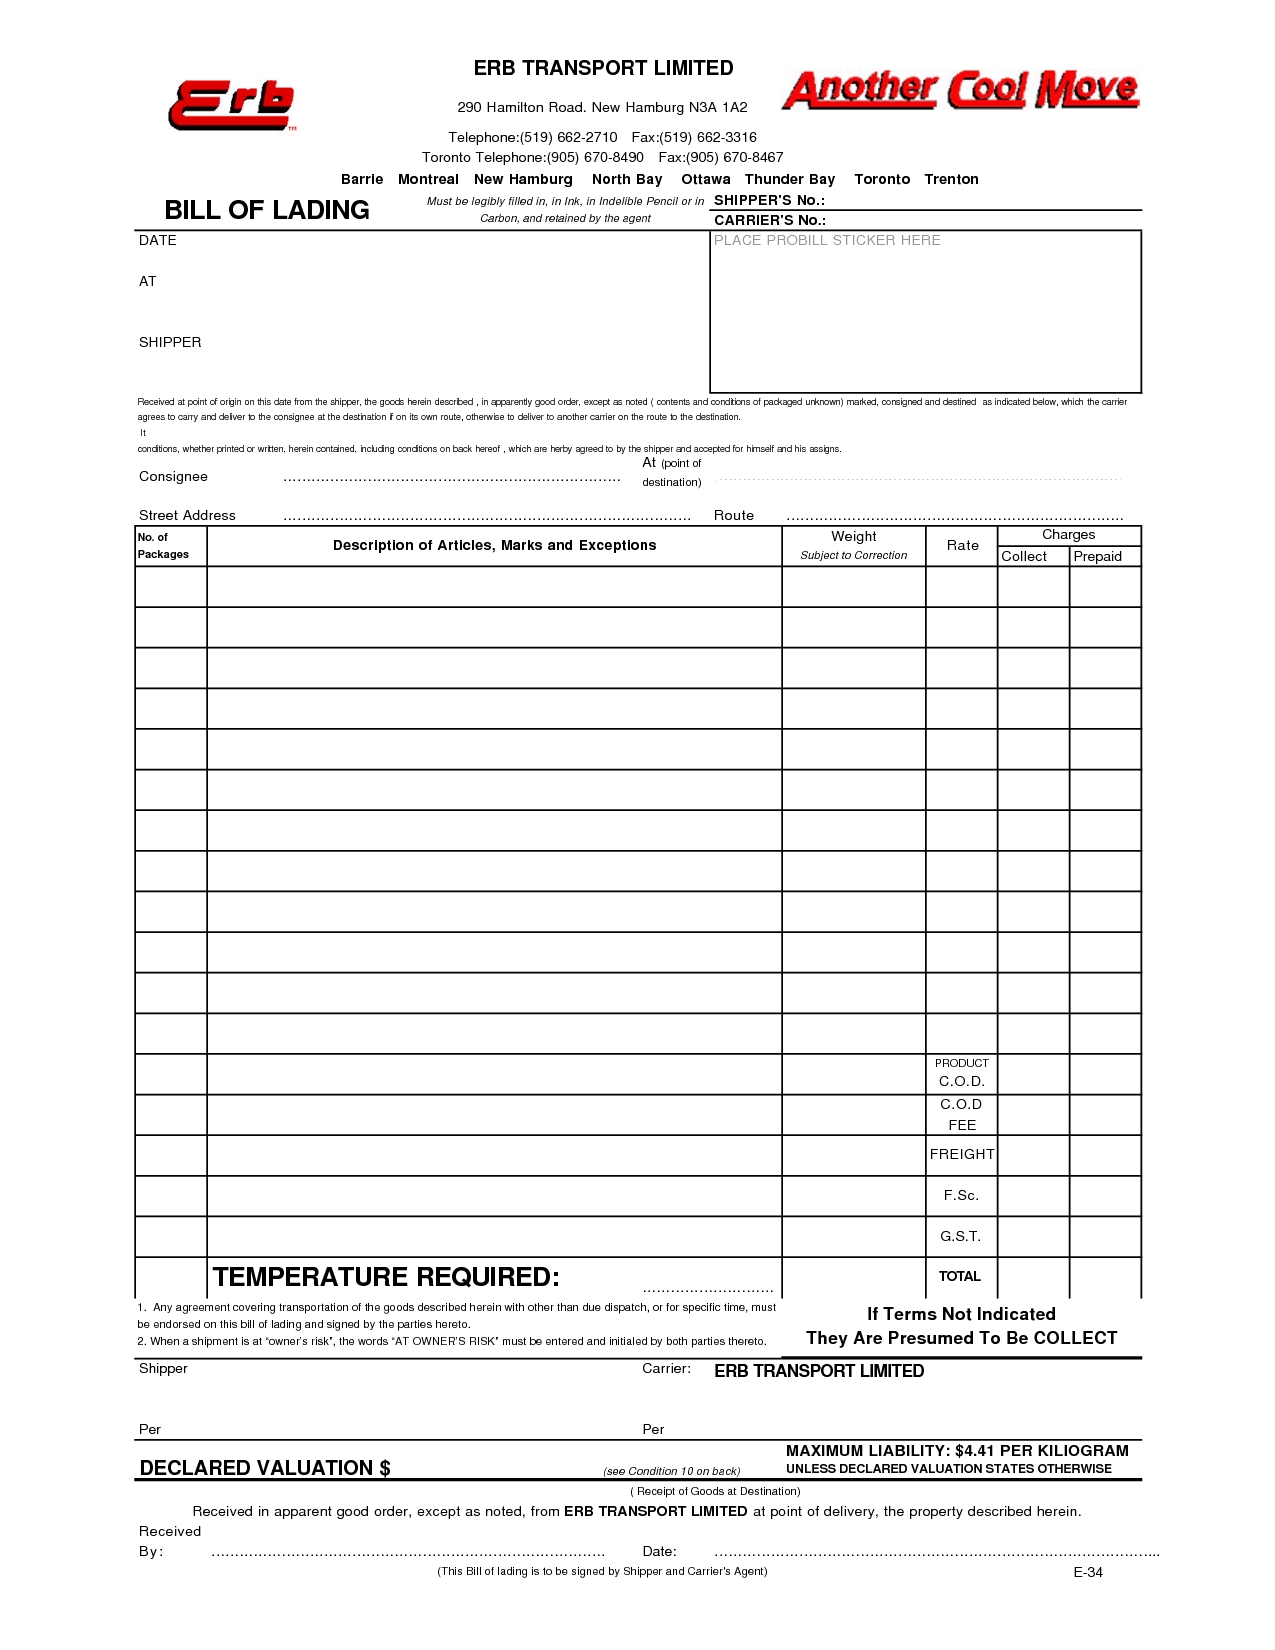 auto transport bill of lading template chainimage transport invoice format